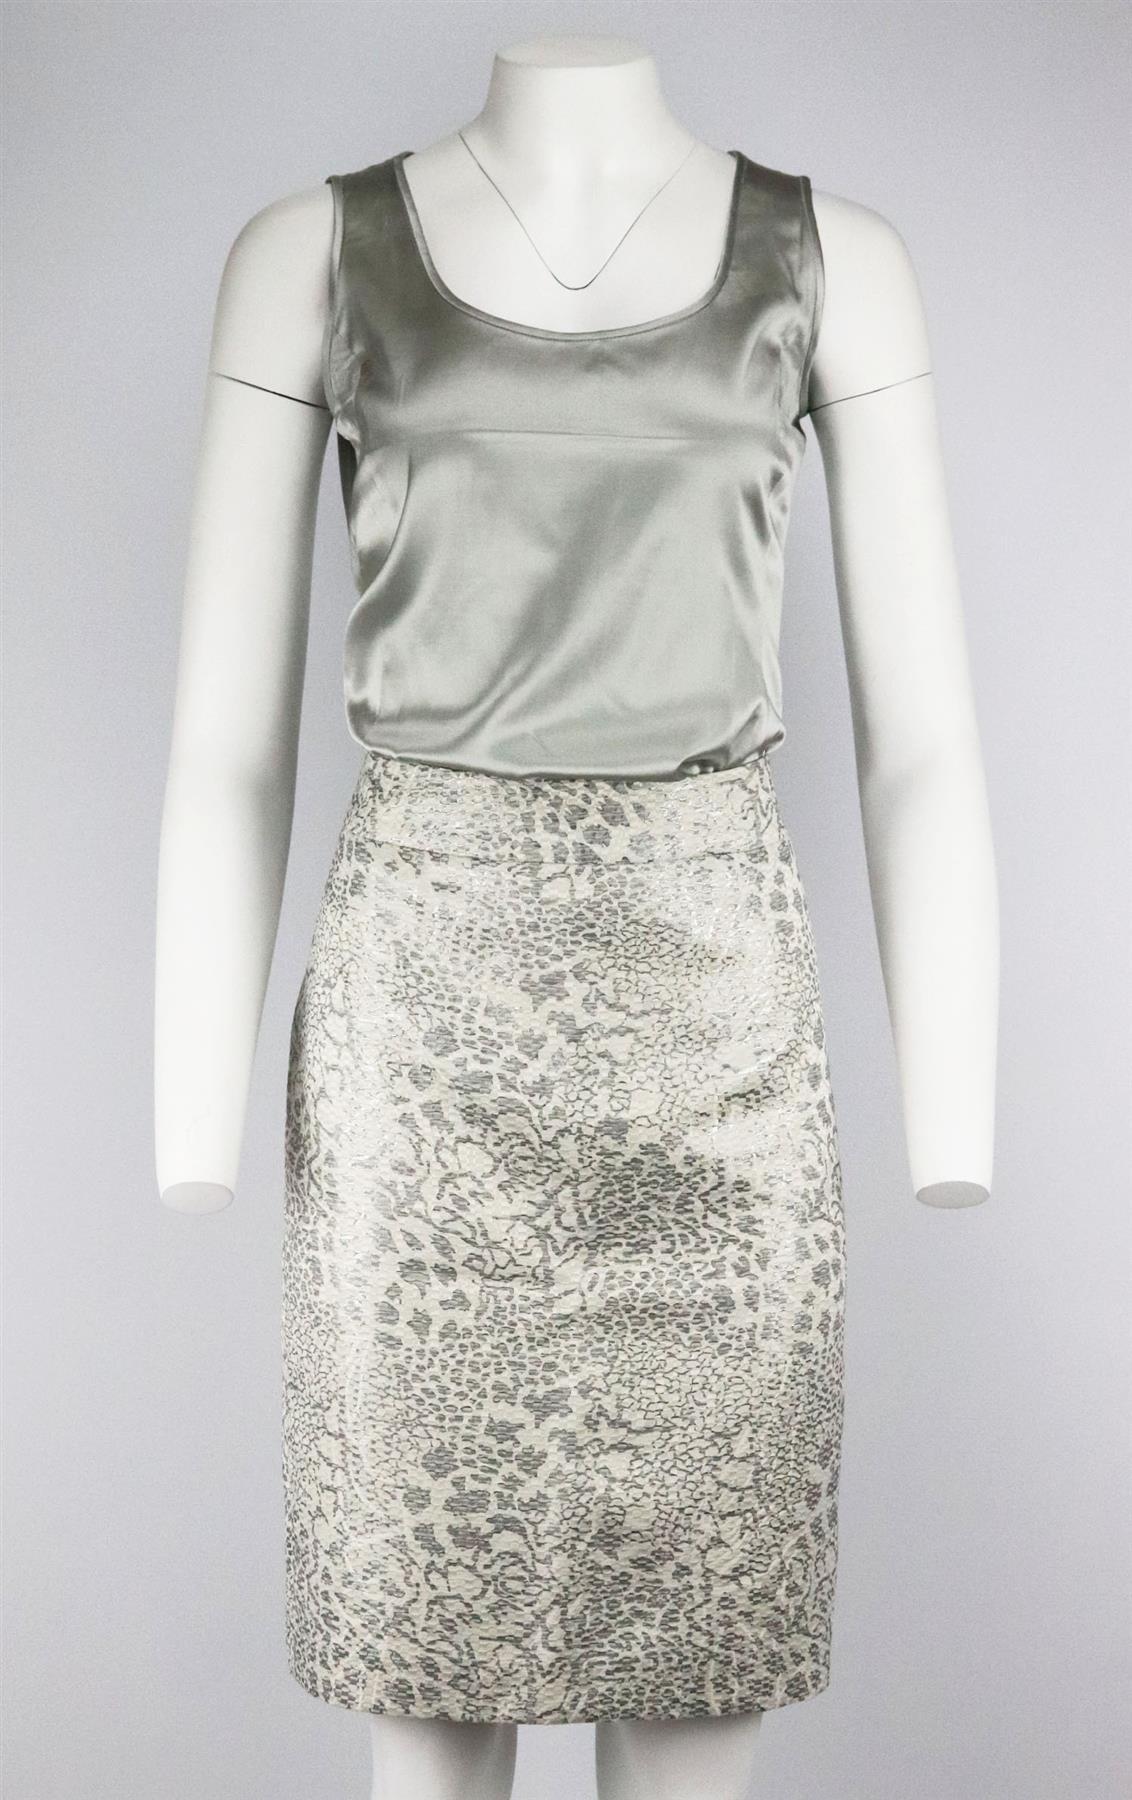 This vintage skirt, jacket and top set by Armani Colleszioni is made from metallic-silver and cream jacquard textured print skirt and jacket with ruffle detail along the neck, it also comes with satin top. Metallic-silver and cream polyester. Button